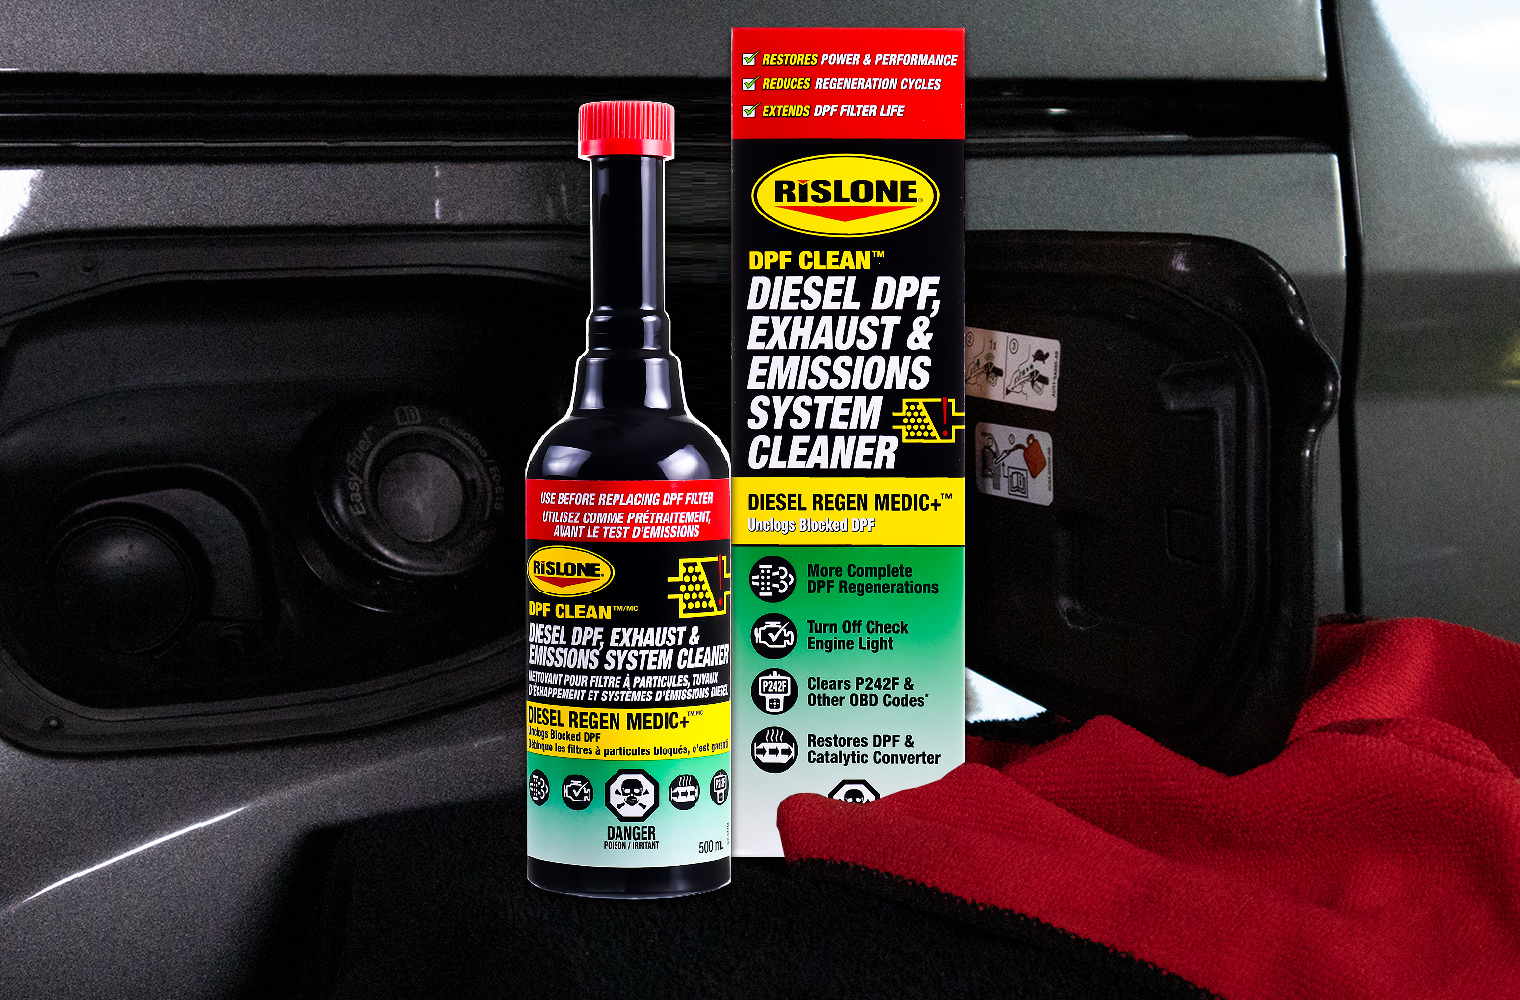 New Rislone DPF Clean Diesel DPF, Exhaust & Emissions System Cleaner cleans the fuel, exhaust, and emissions systems of diesel vehicles to restore power and performance, reduce regeneration cycles, extend diesel particulate filter (DPF) life, save fuel, and turn off check engine lights. 